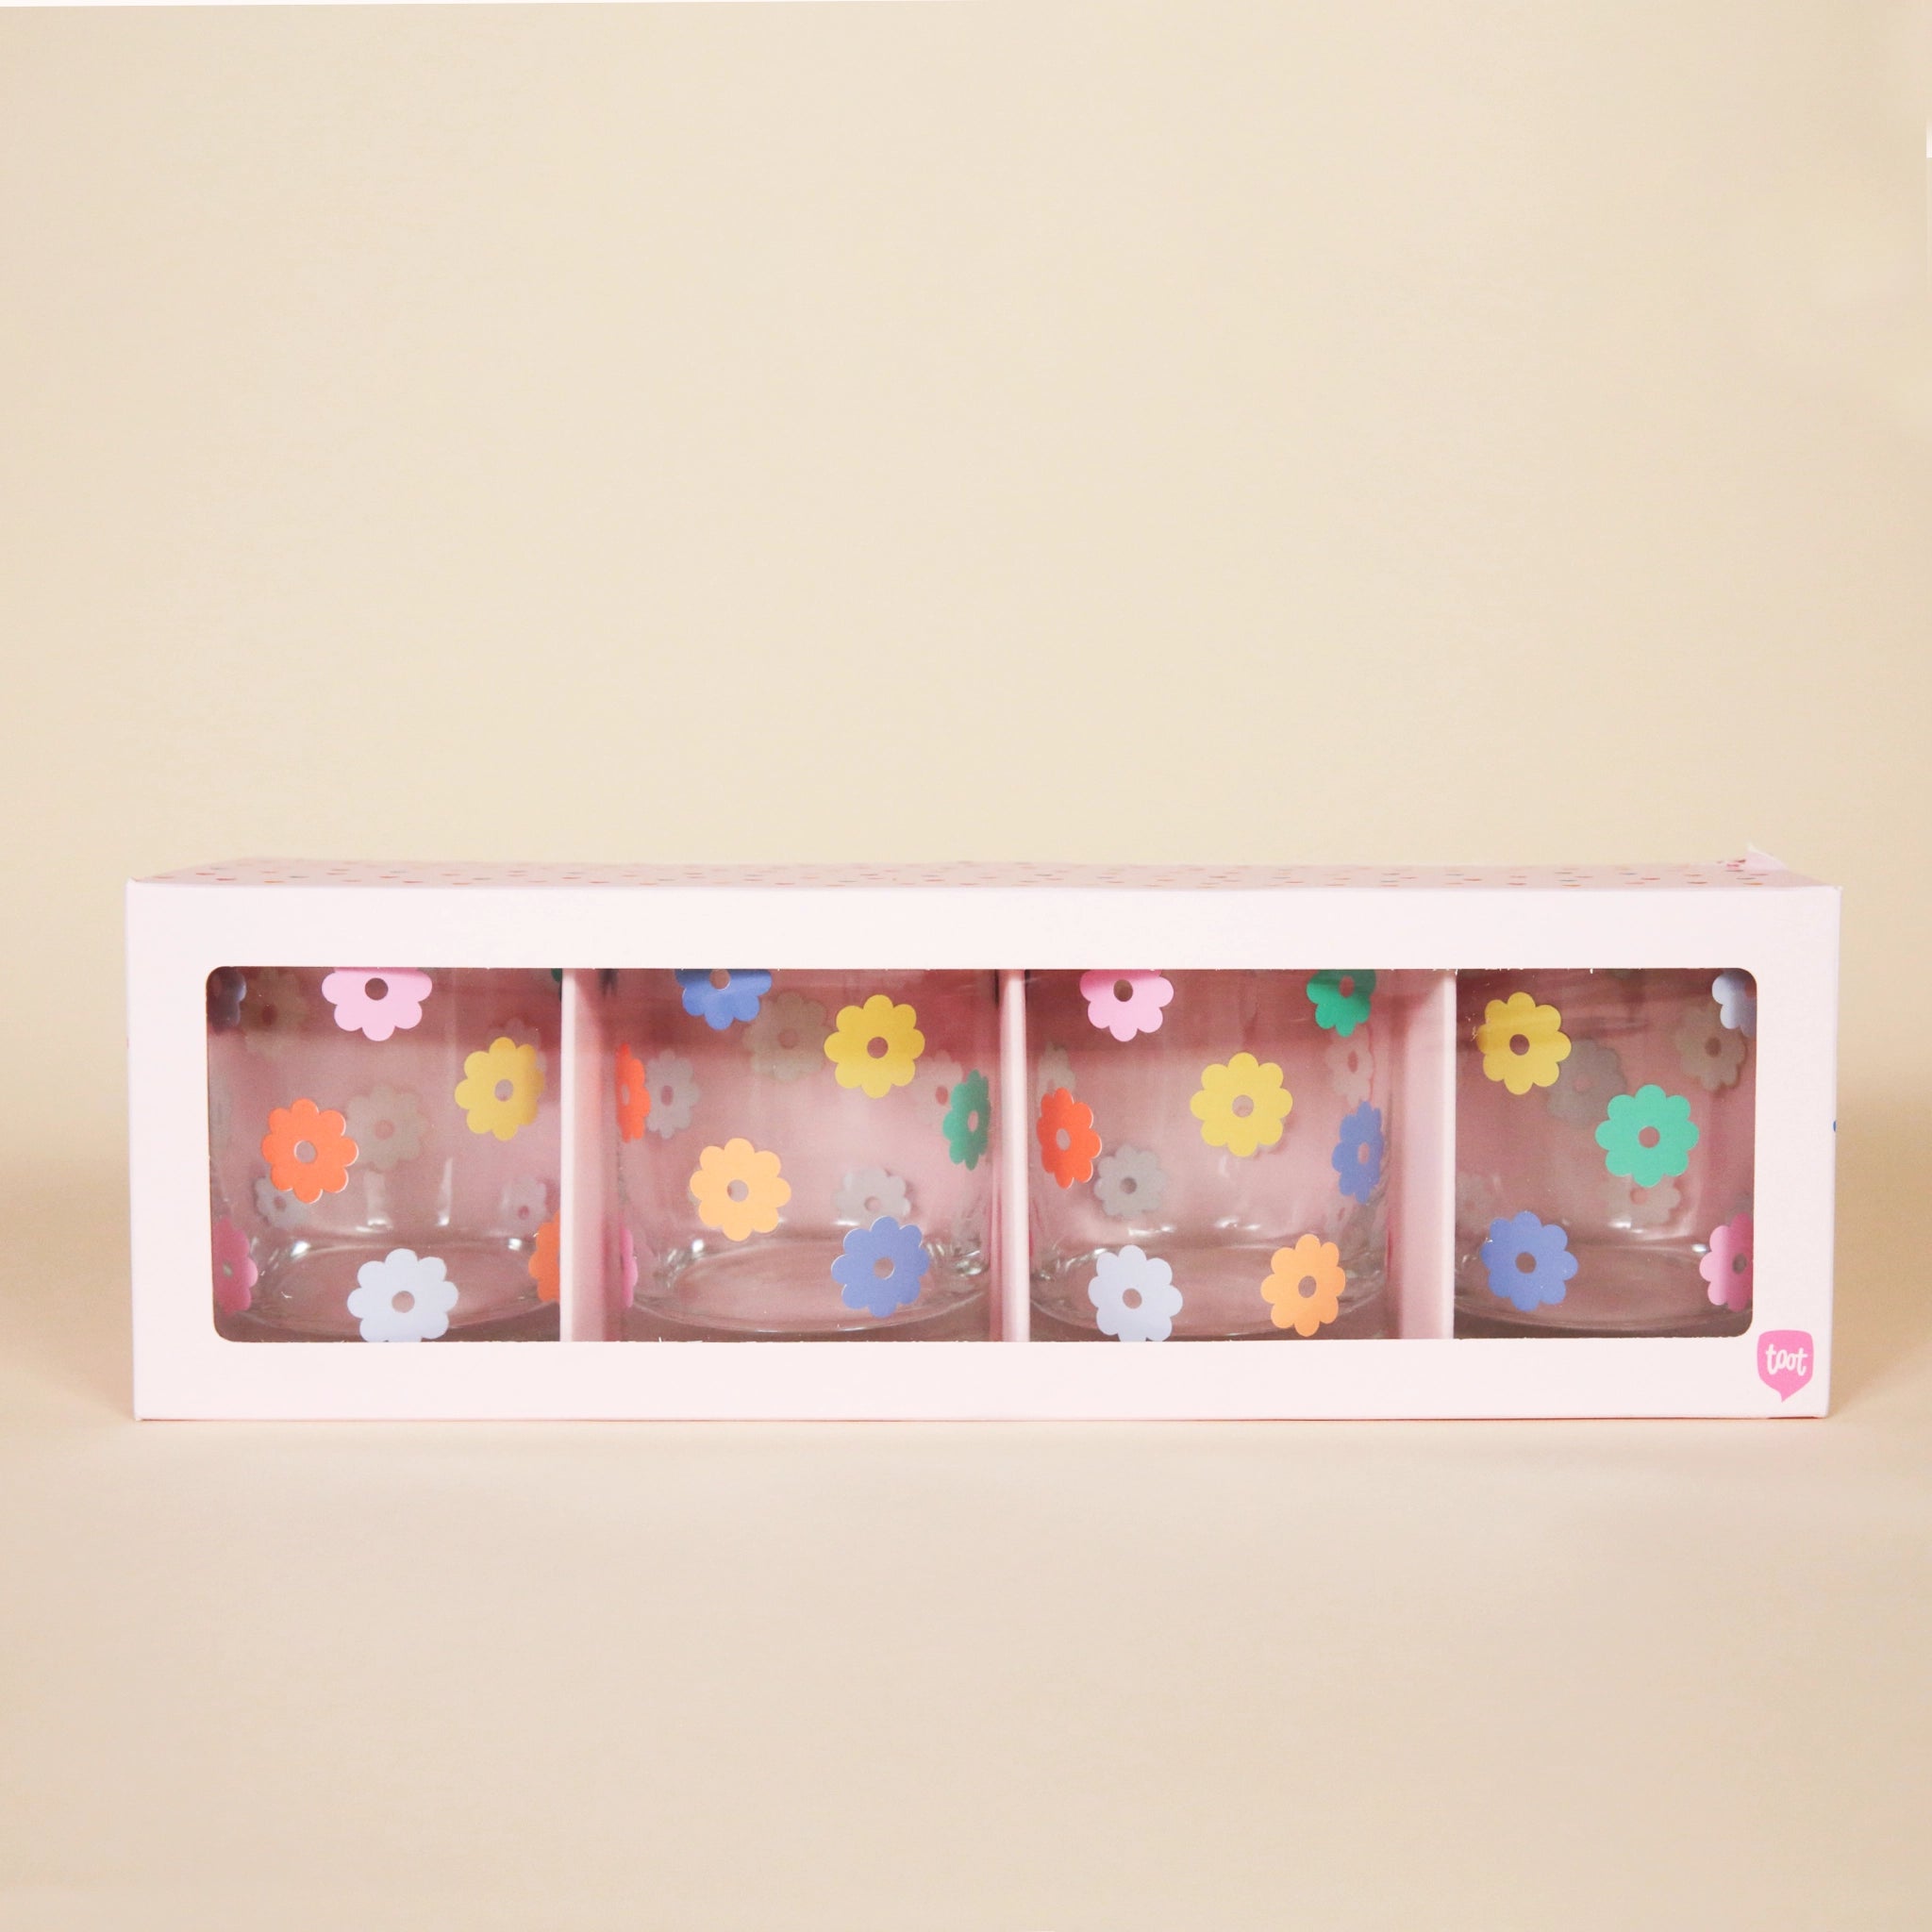 A set of four short glass tumblers with multicolor daisy pattern photographed here in the light pink box they come in.